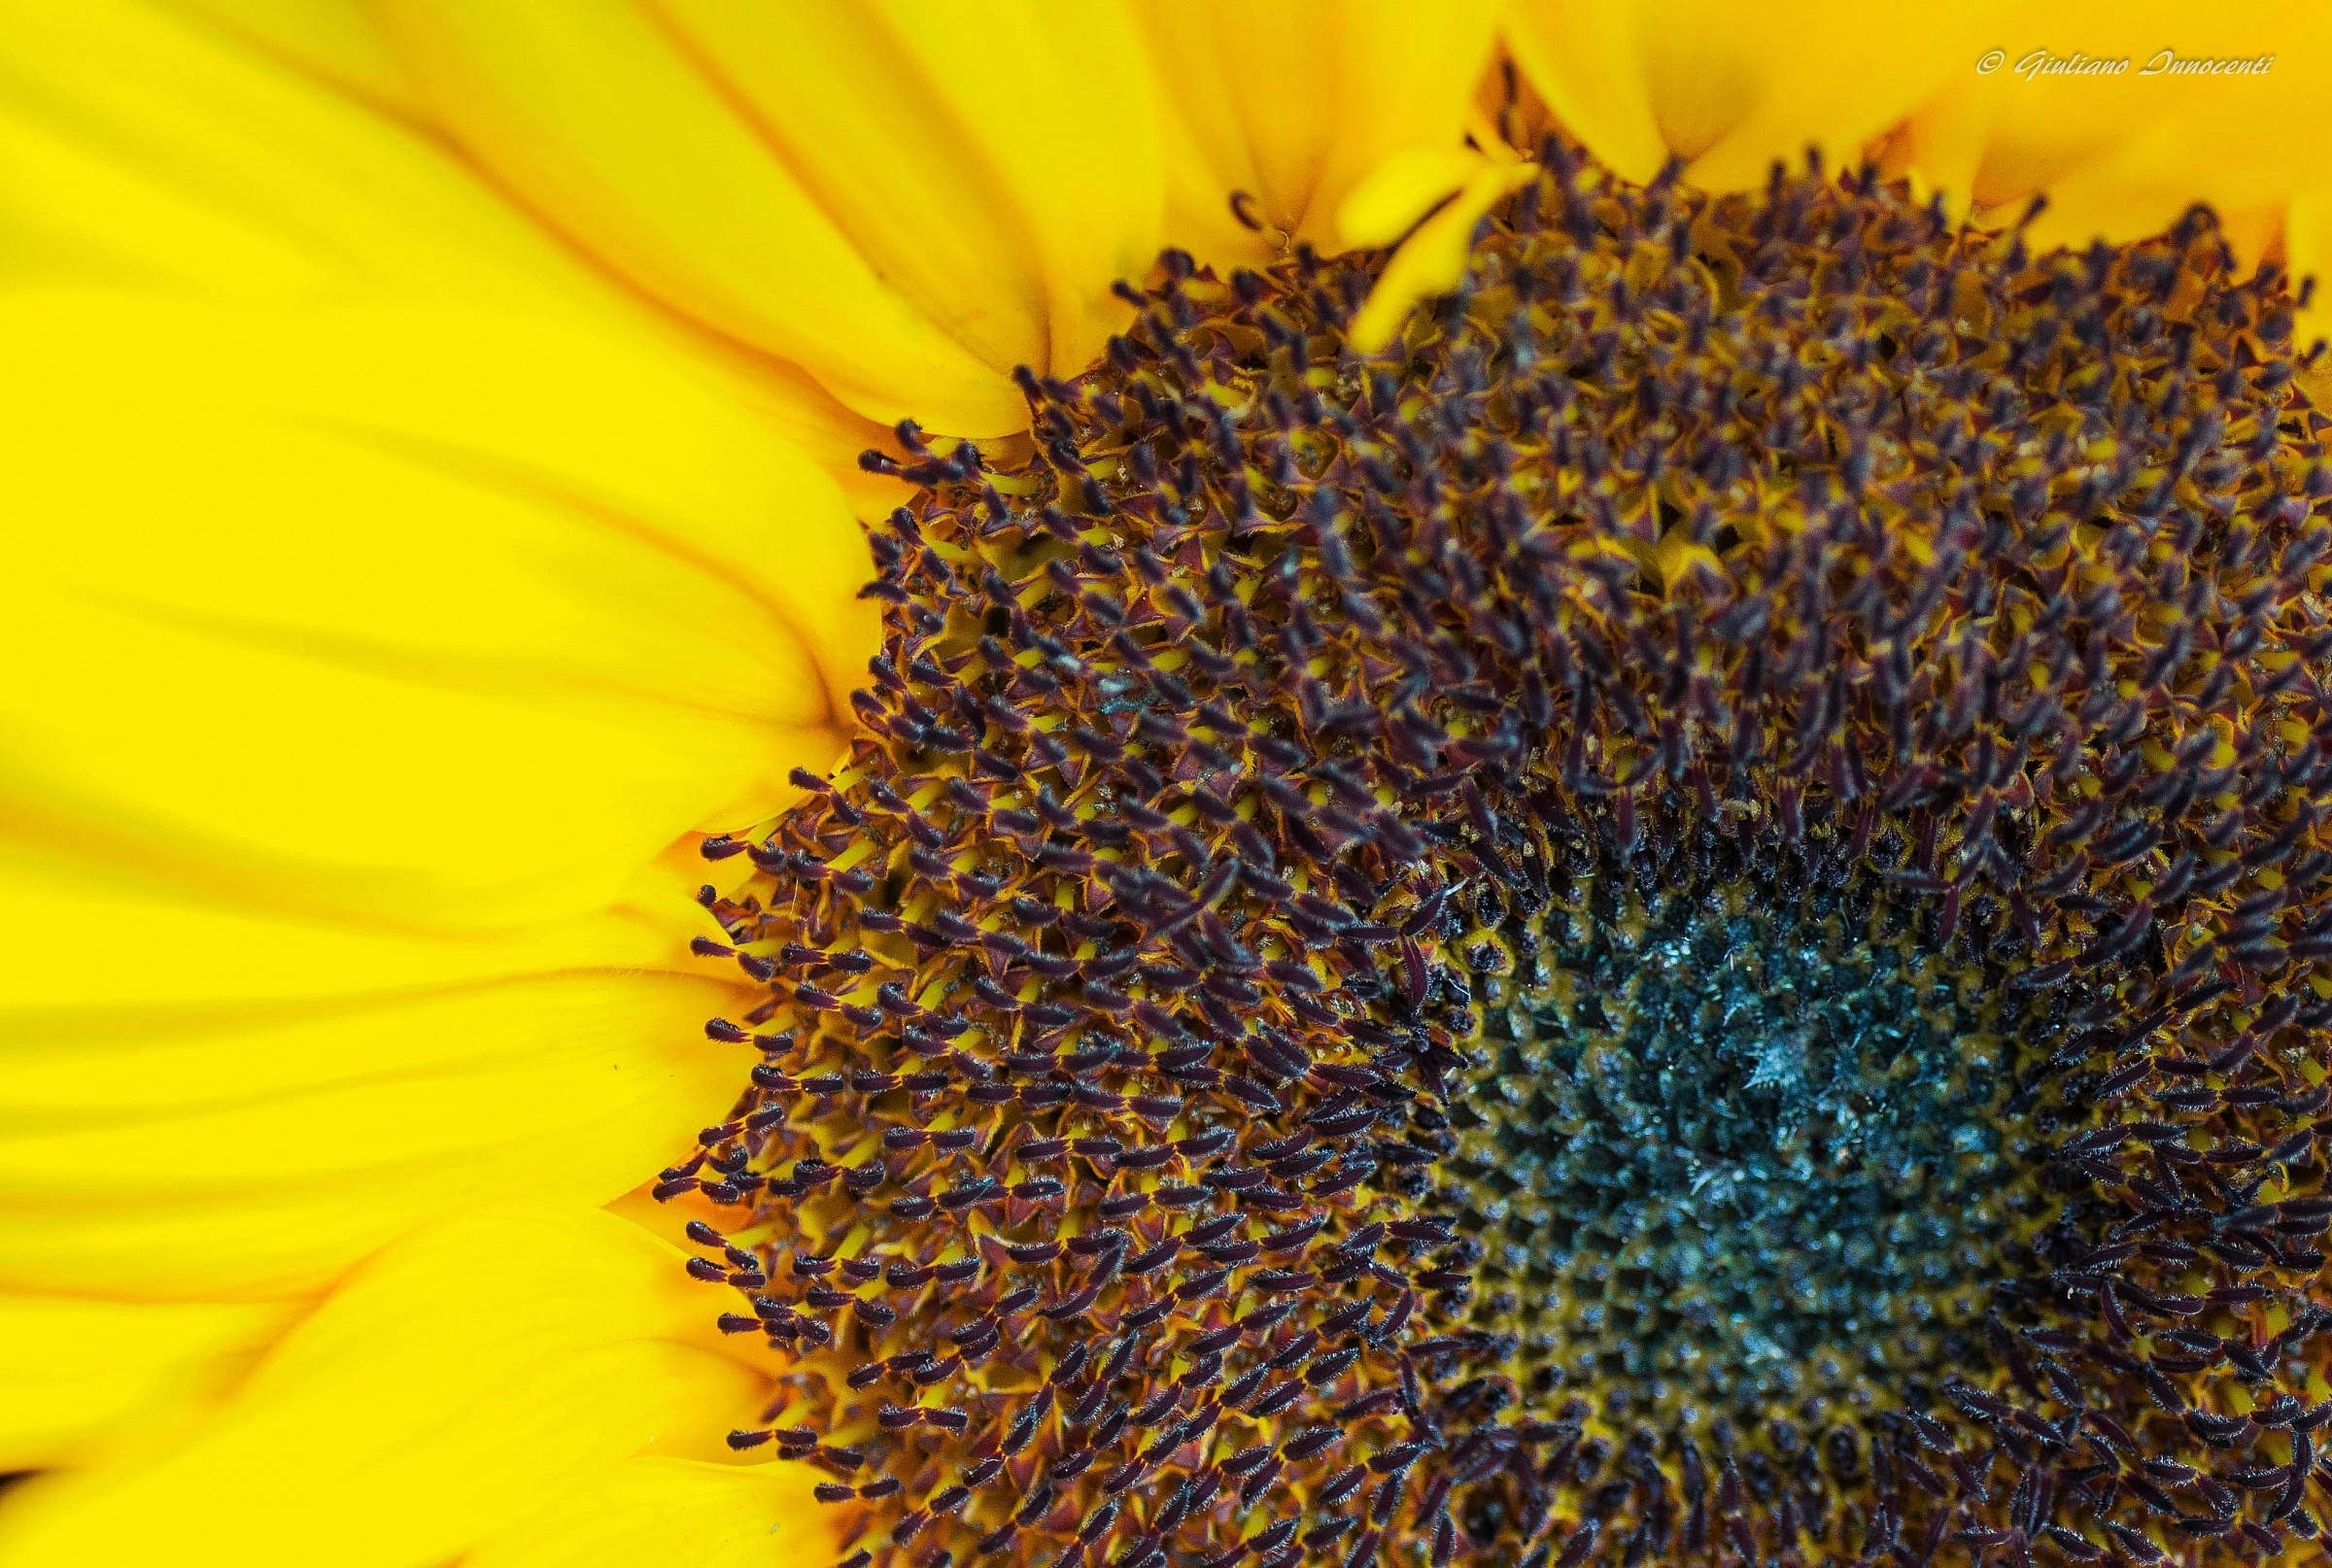 the eye of the sunflower...